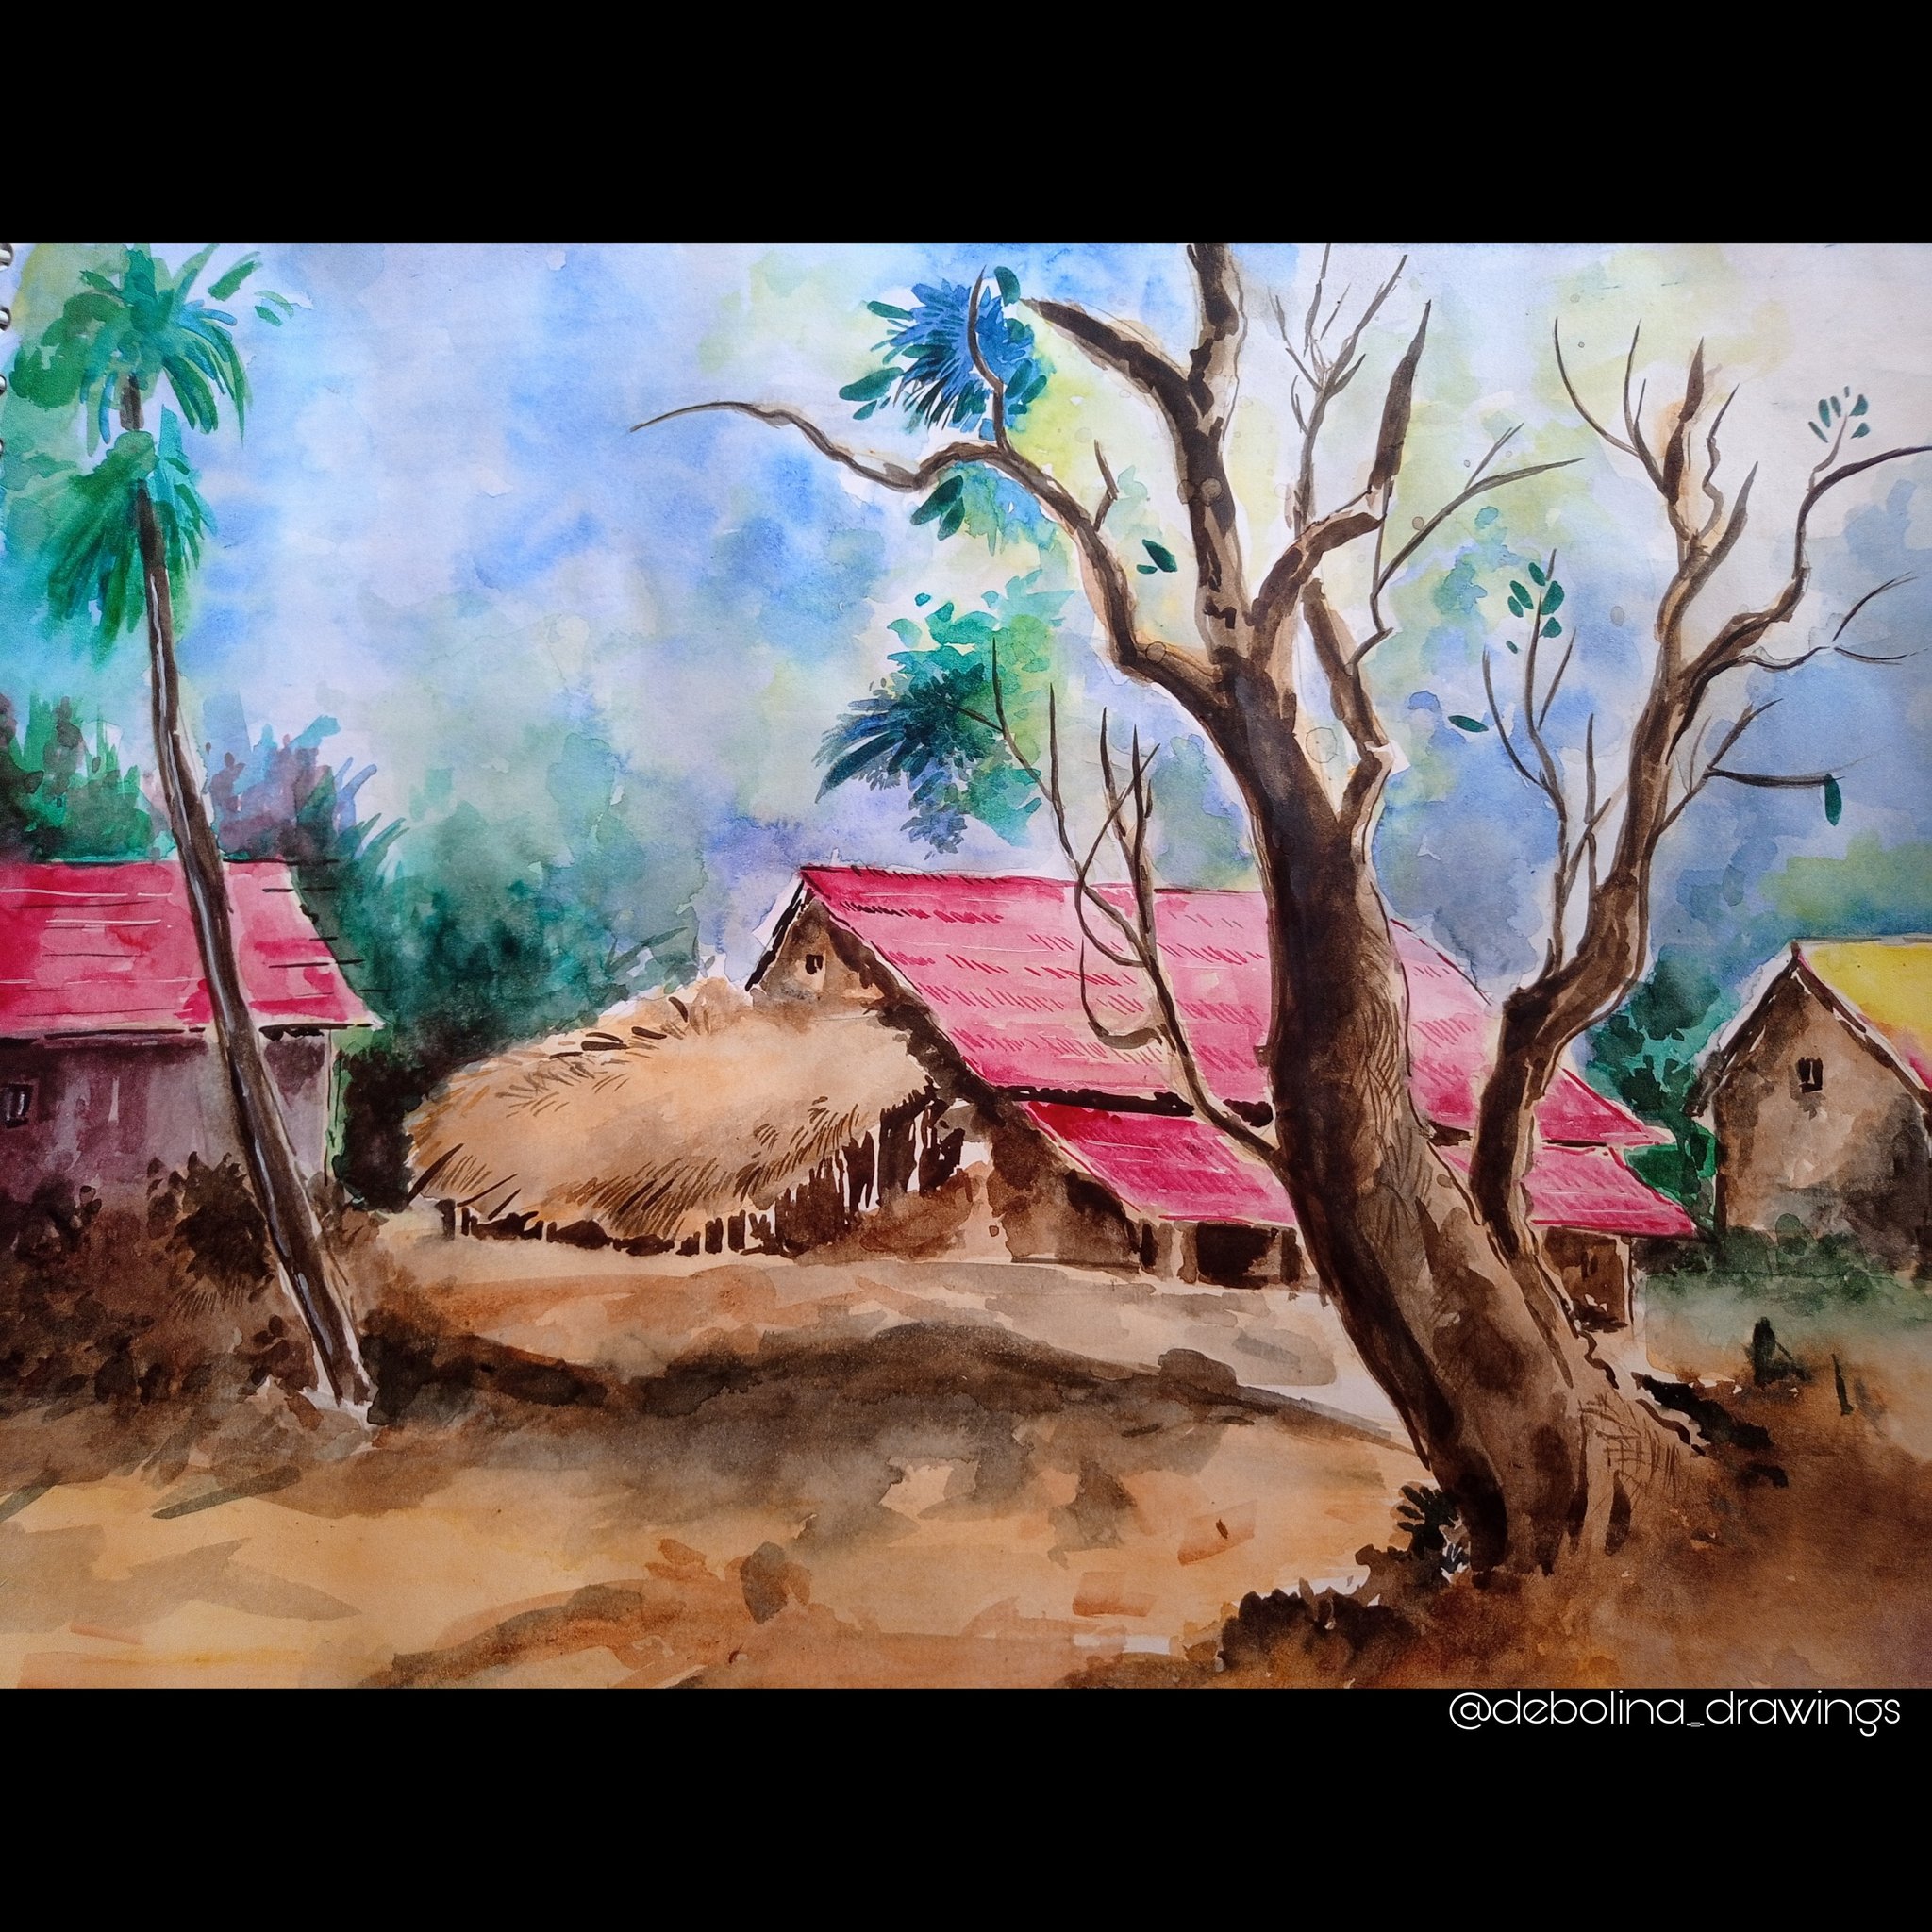 watercolor landscape painting - scenery drawing of nature | Watercolor  landscape paintings, Landscape paintings, Watercolor landscape